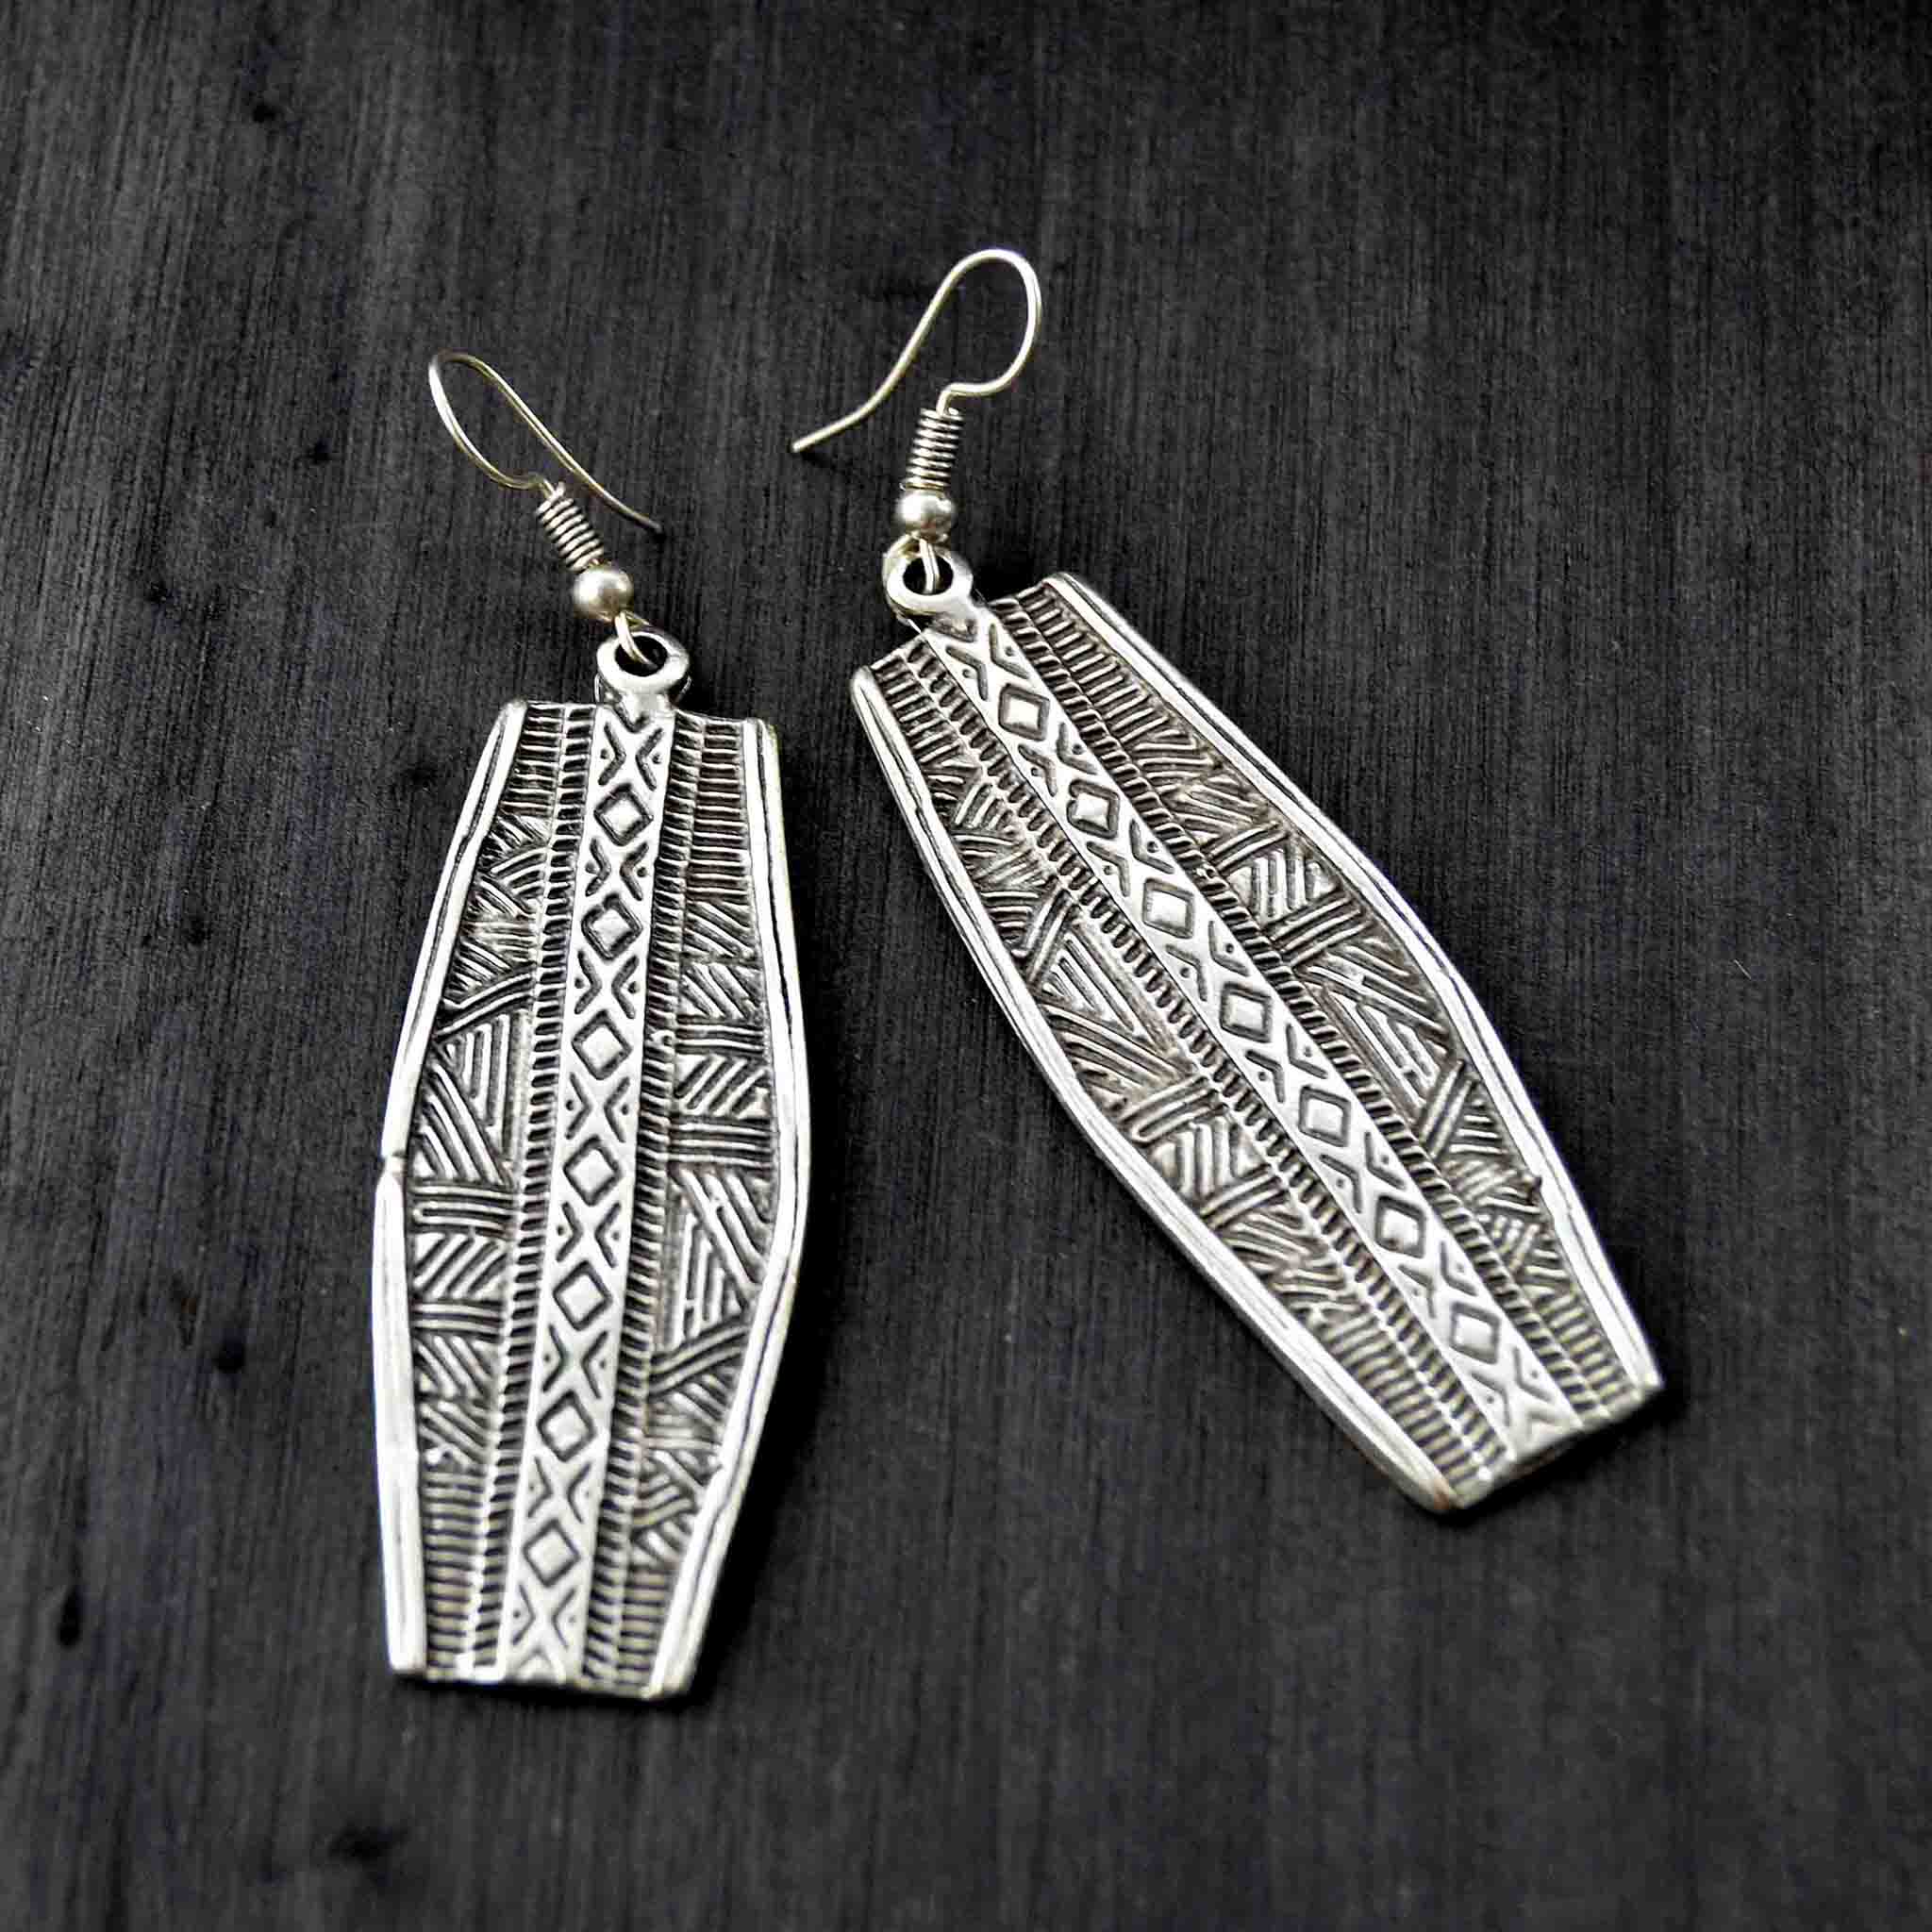 Long ethnic earrings with engraved african inspired geometric motifs